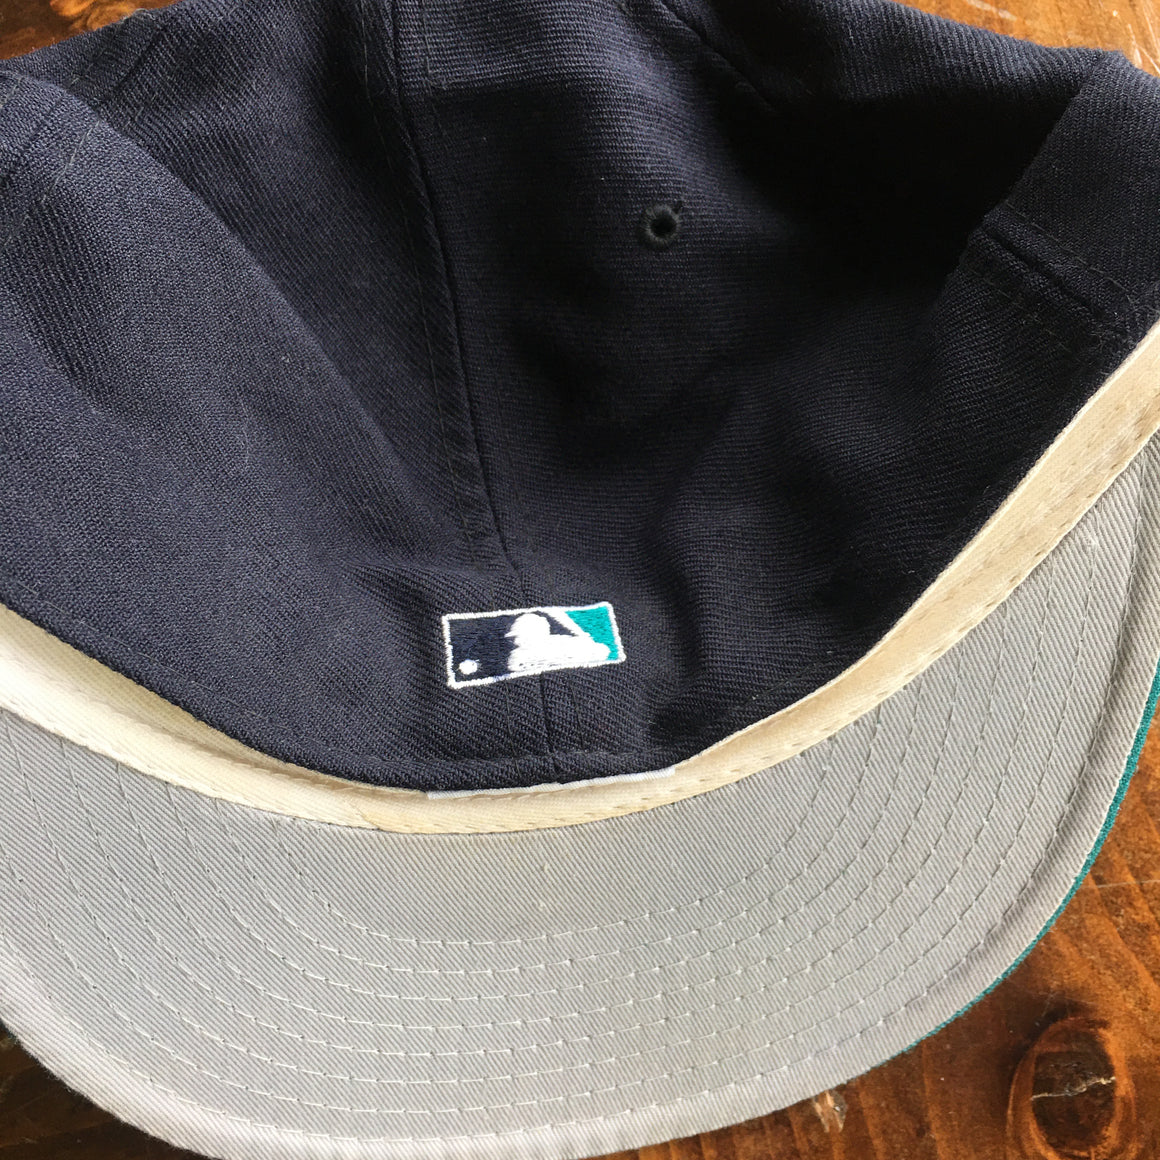 Seattle Mariners hat - 7 1/4